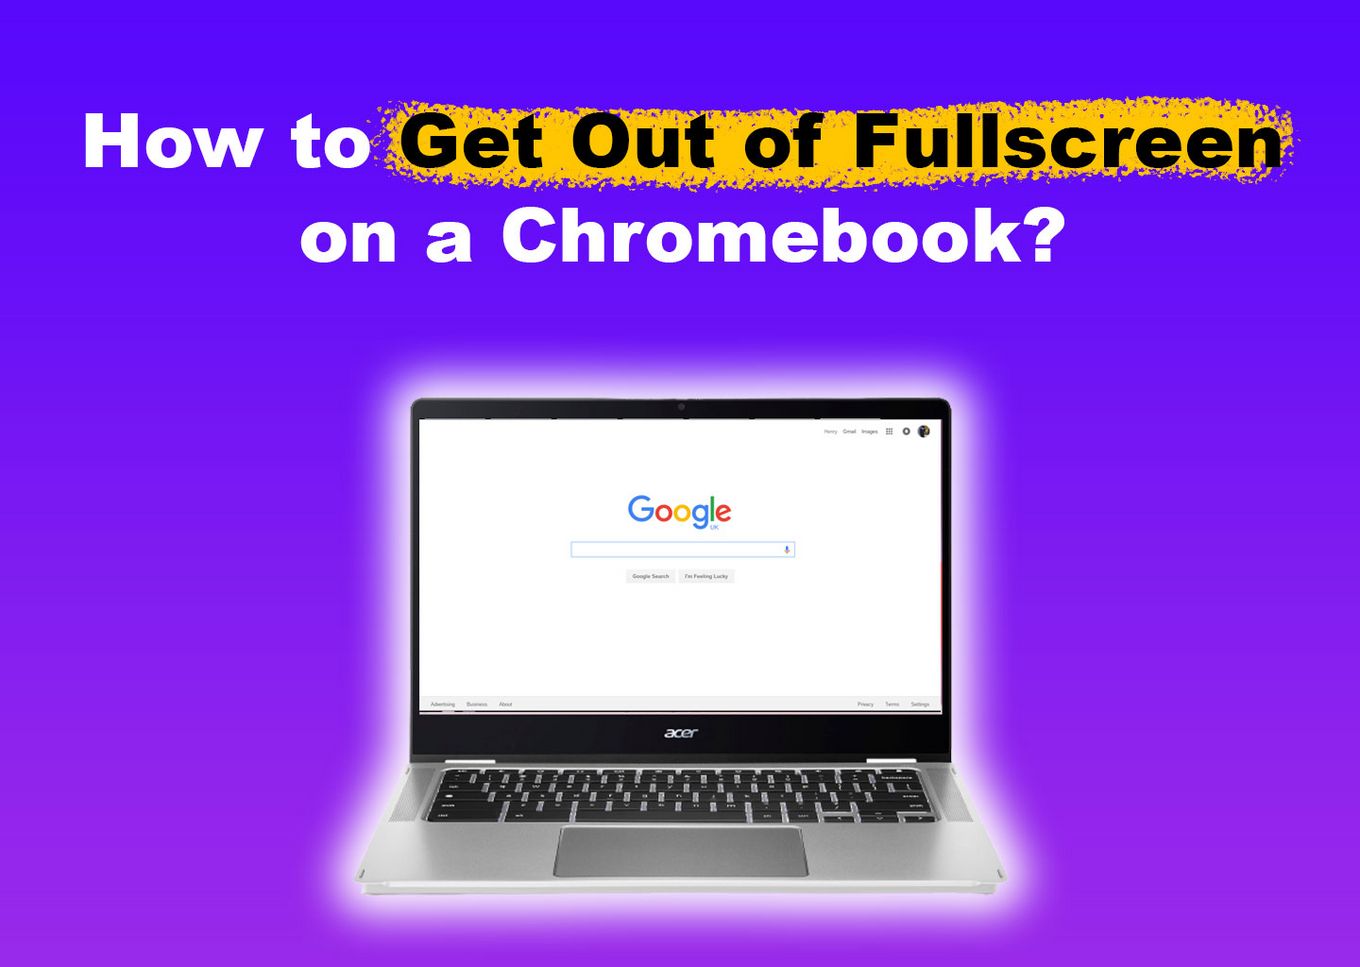 How to get out of fullscreen on a Chromebook